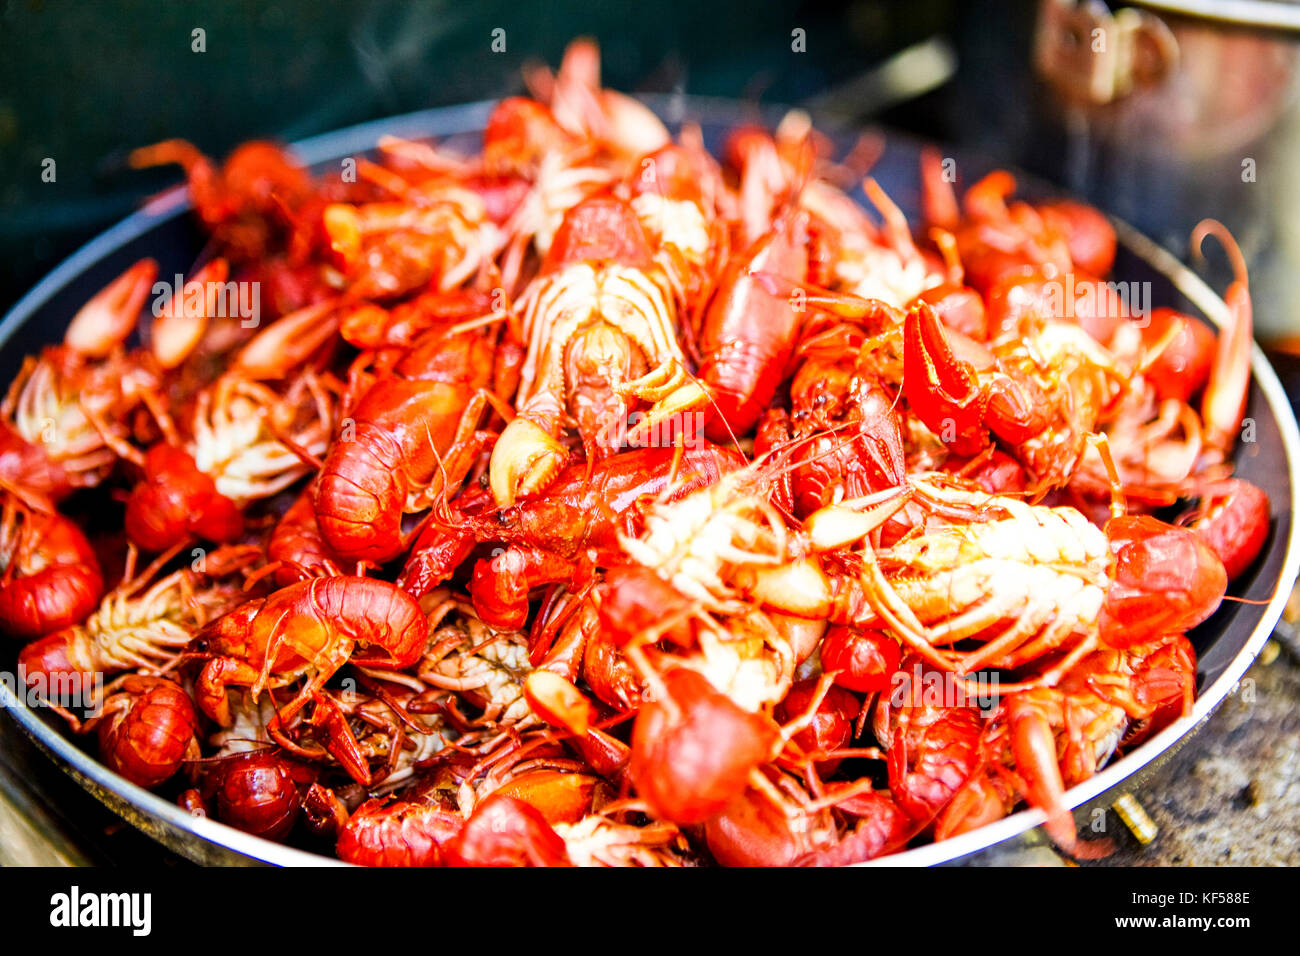 Pan of freshly cooked crawdads, freshwater lobster, crayfish or crawfish ready for eating Stock Photo